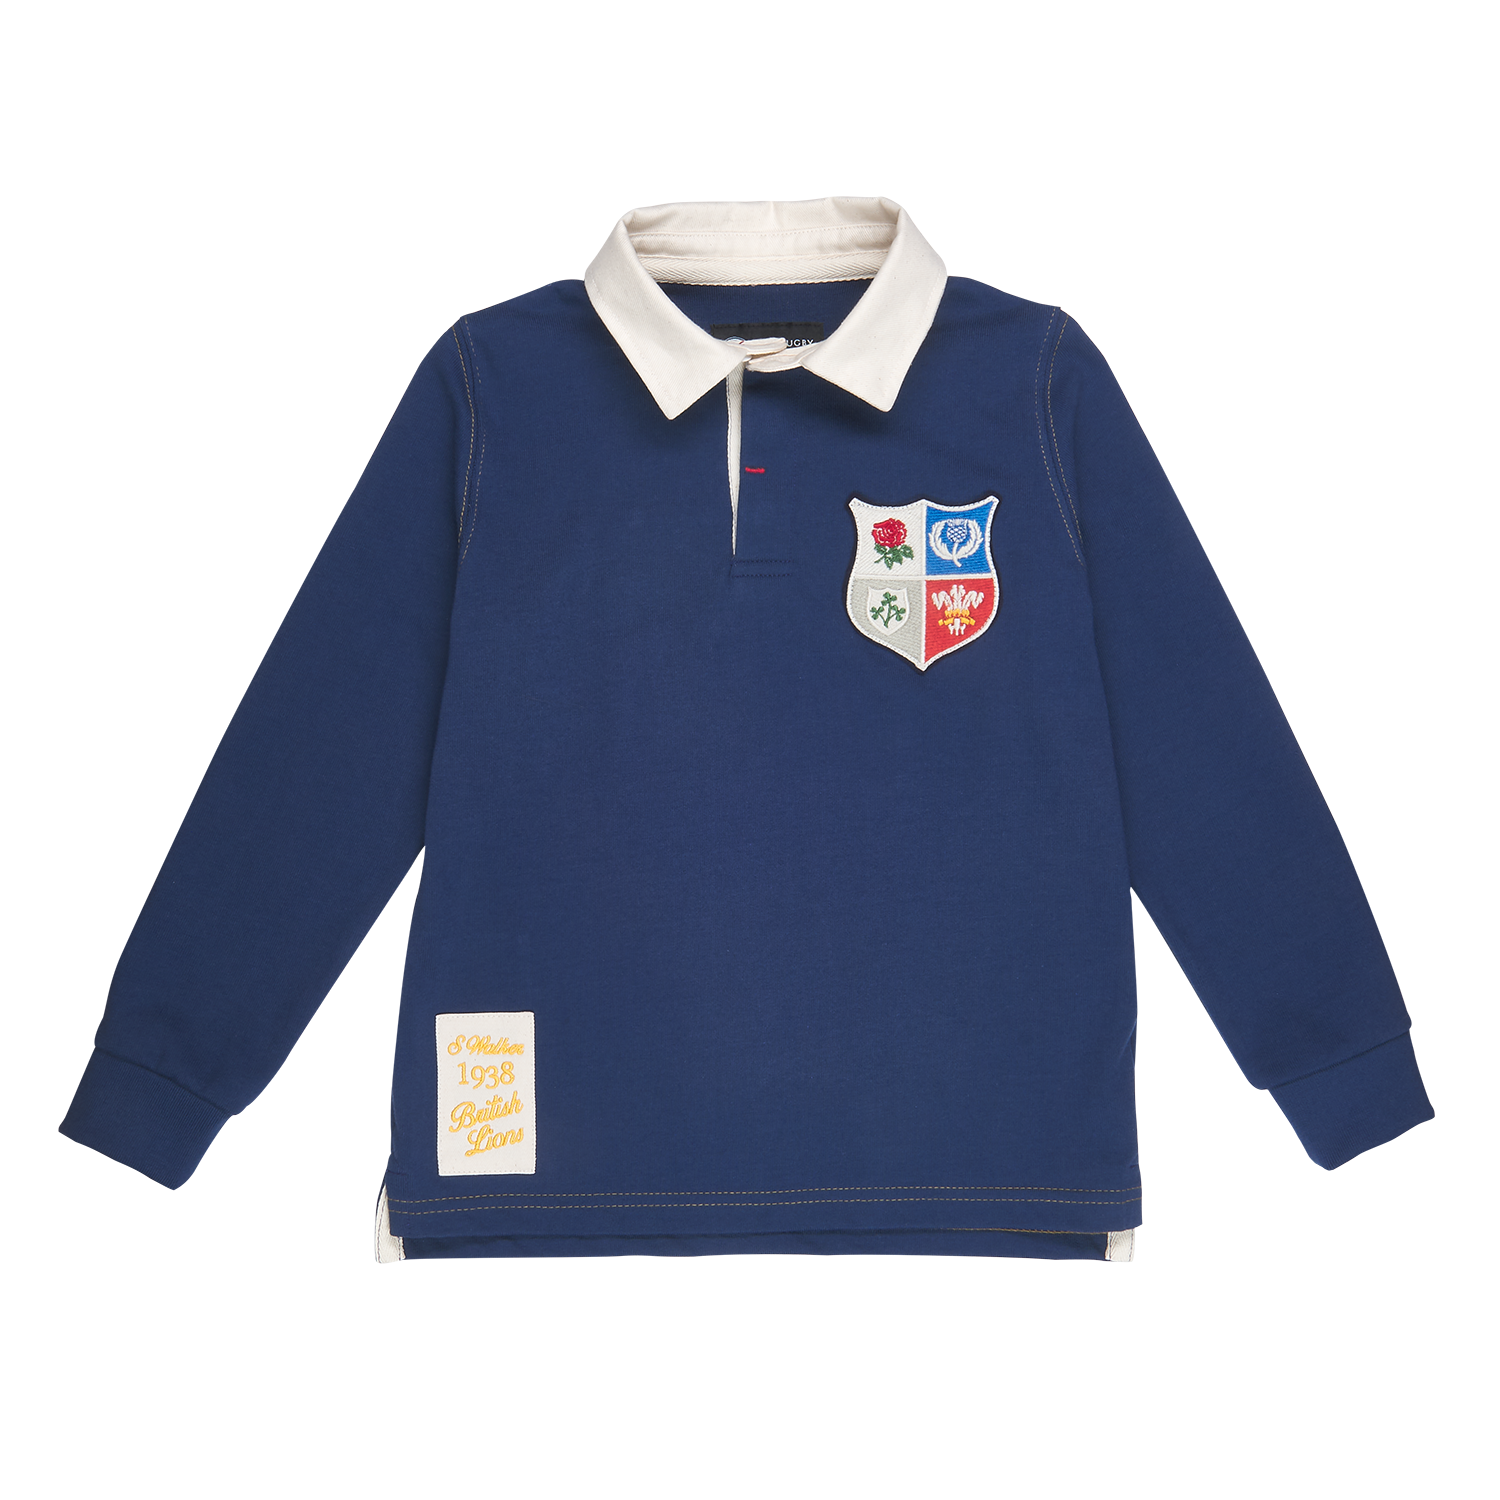 British Lions Colts product image - front